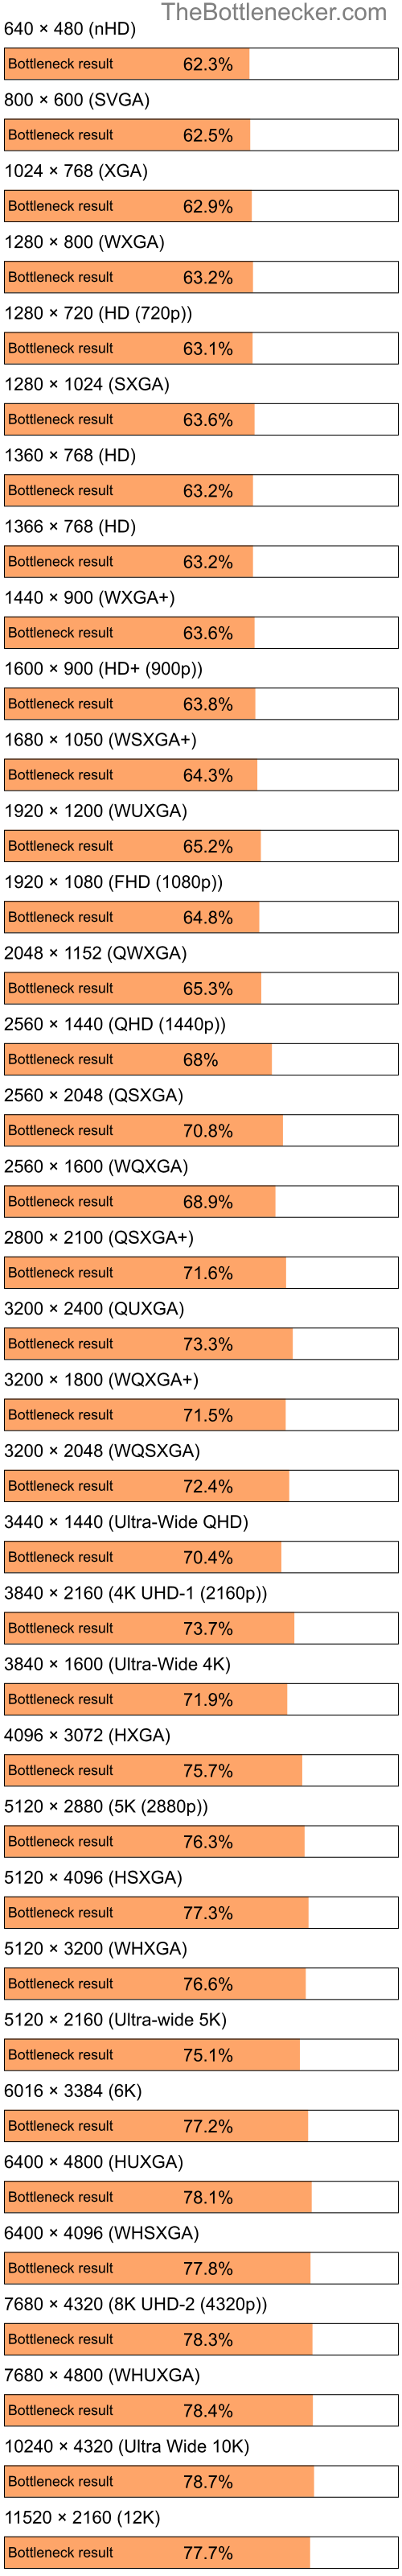 Bottleneck results by resolution for Intel Atom N270 and NVIDIA GeForce 210 in7 Days to Die